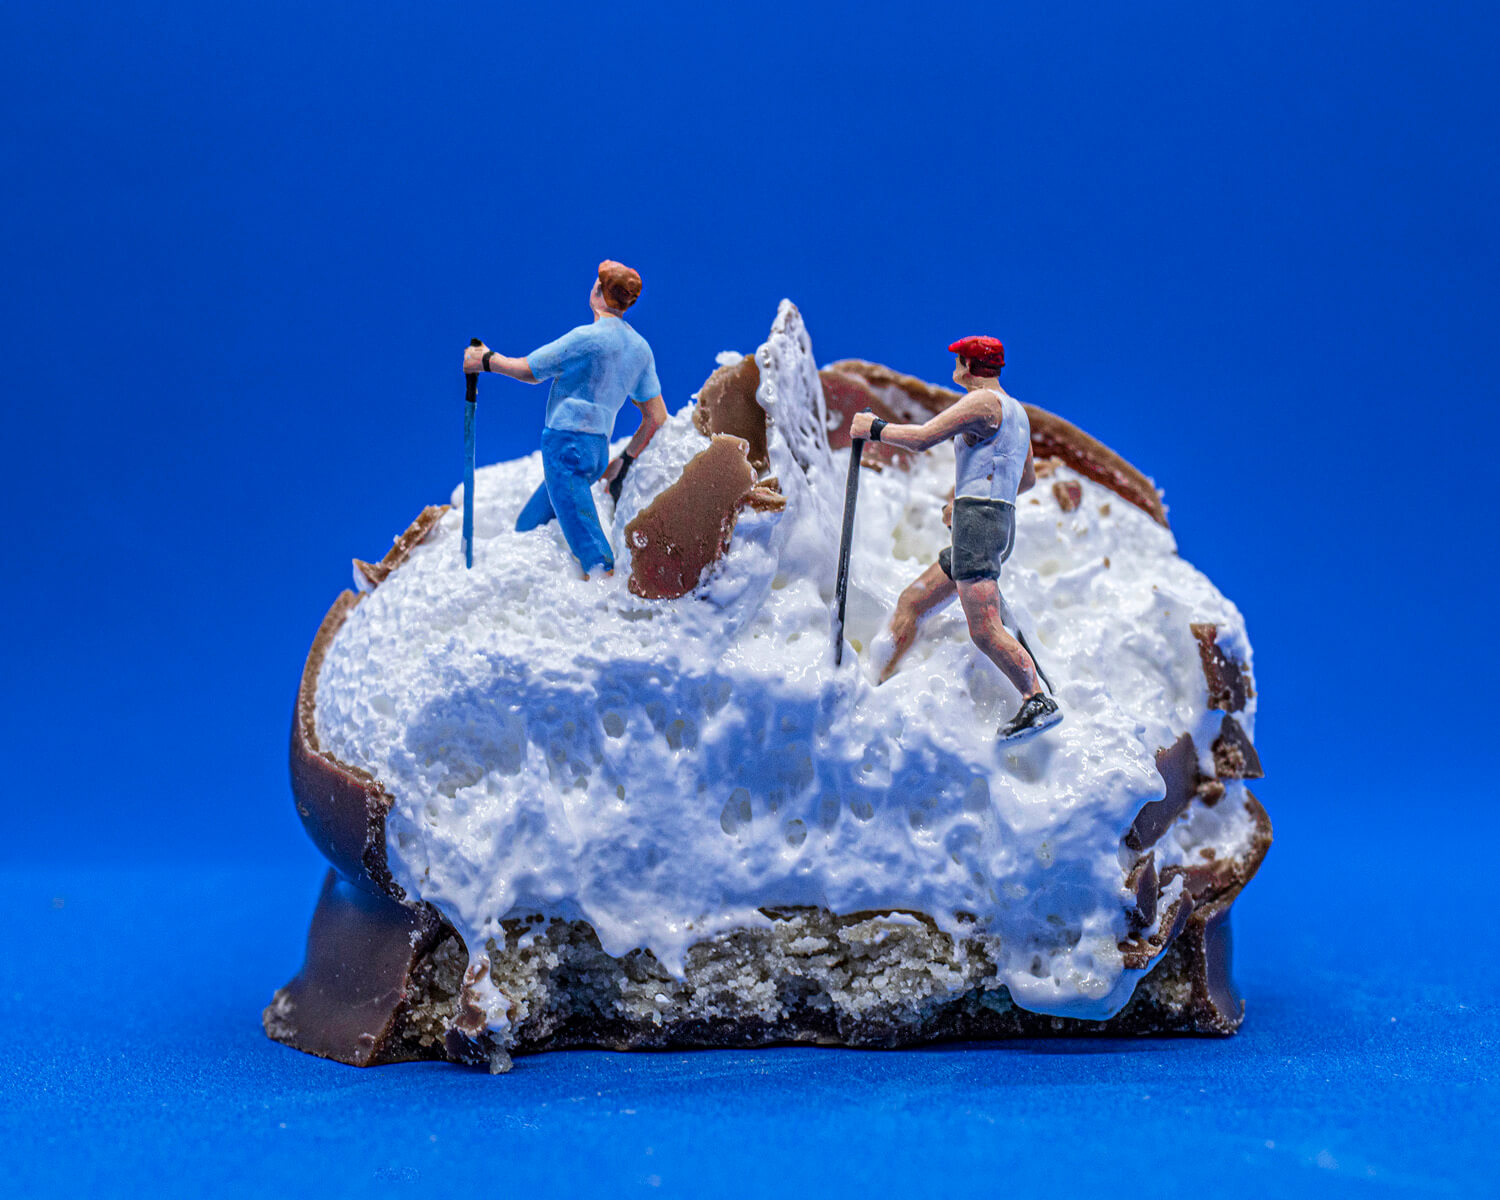 Miniature figurines of hikers traversing a rugged, snowy terrain that is actually a half-eaten tea cake, with the white marshmallow mimicking snow and the chocolatey base resembling rocky ground, against a vibrant blue backdrop.